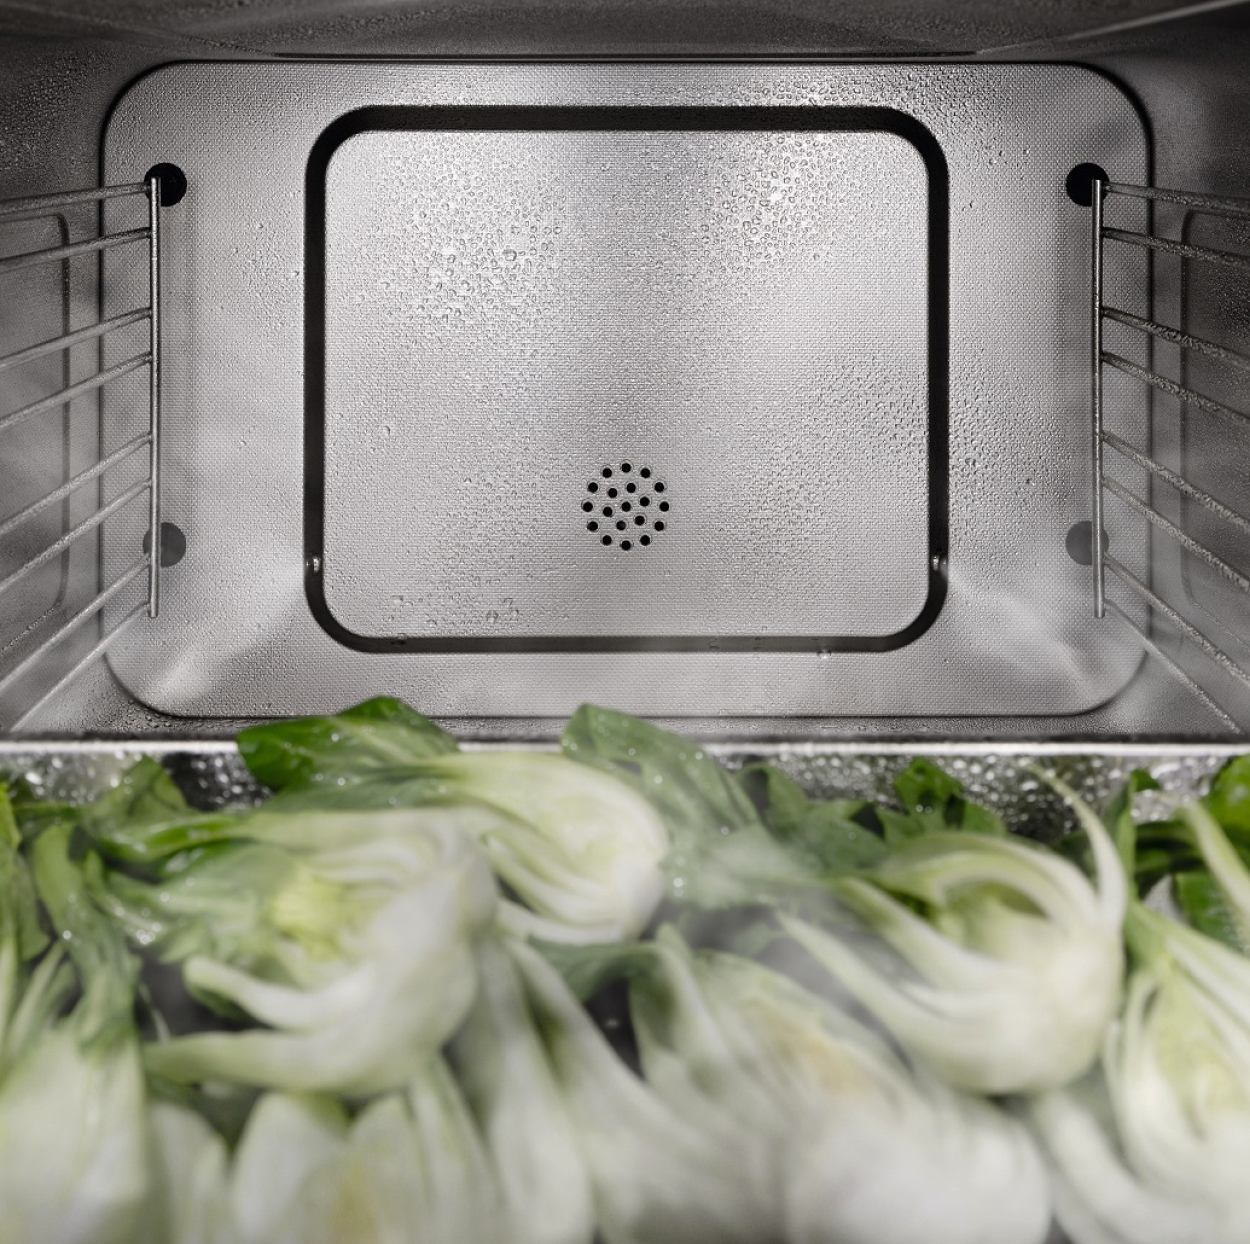 Bake, roast and even sous vide your to culinary glory with Miele's ultra-sophisticated oven technology